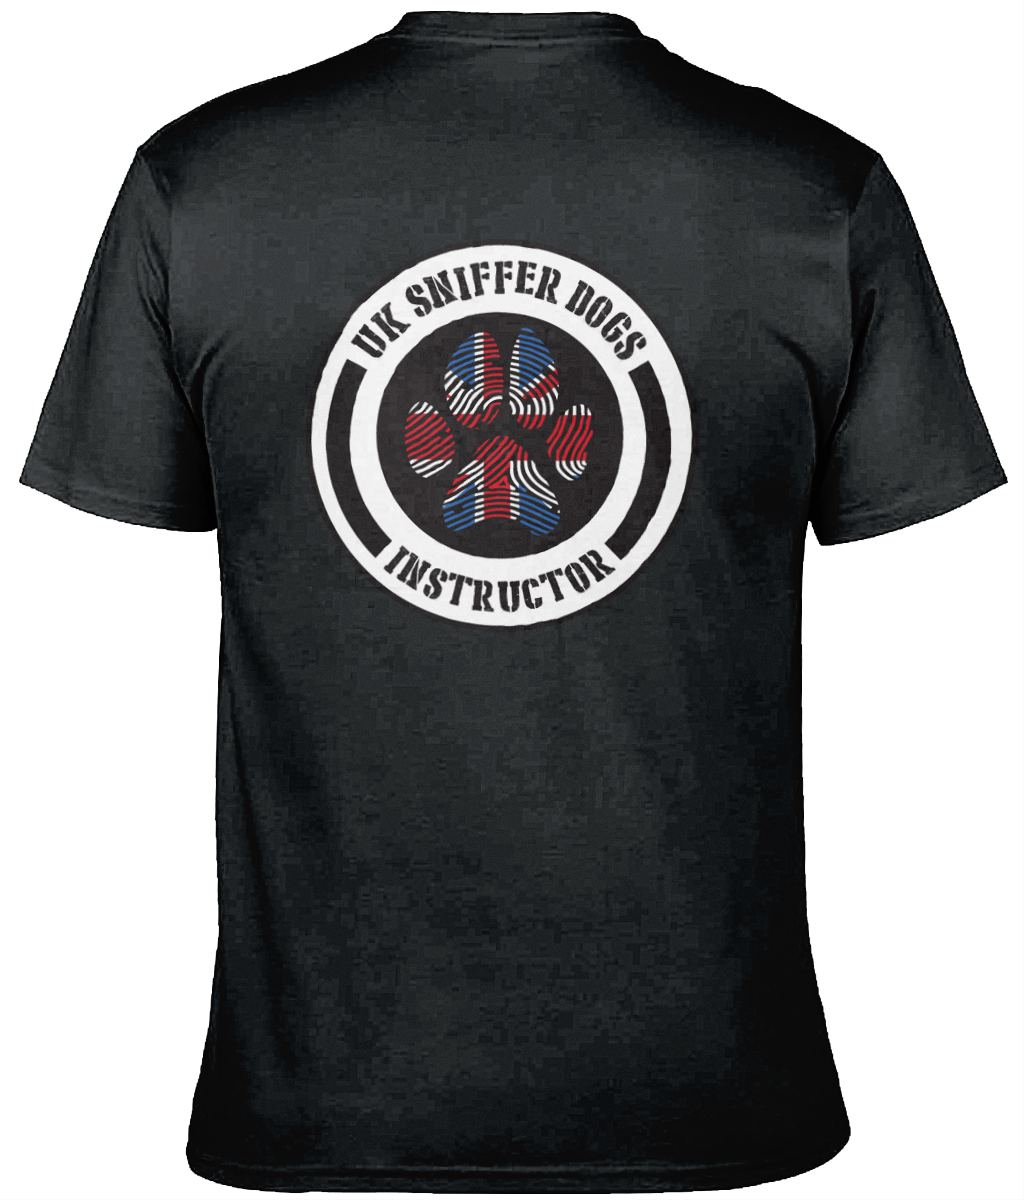 UK Sniffer Dogs Instructor T-Shirt